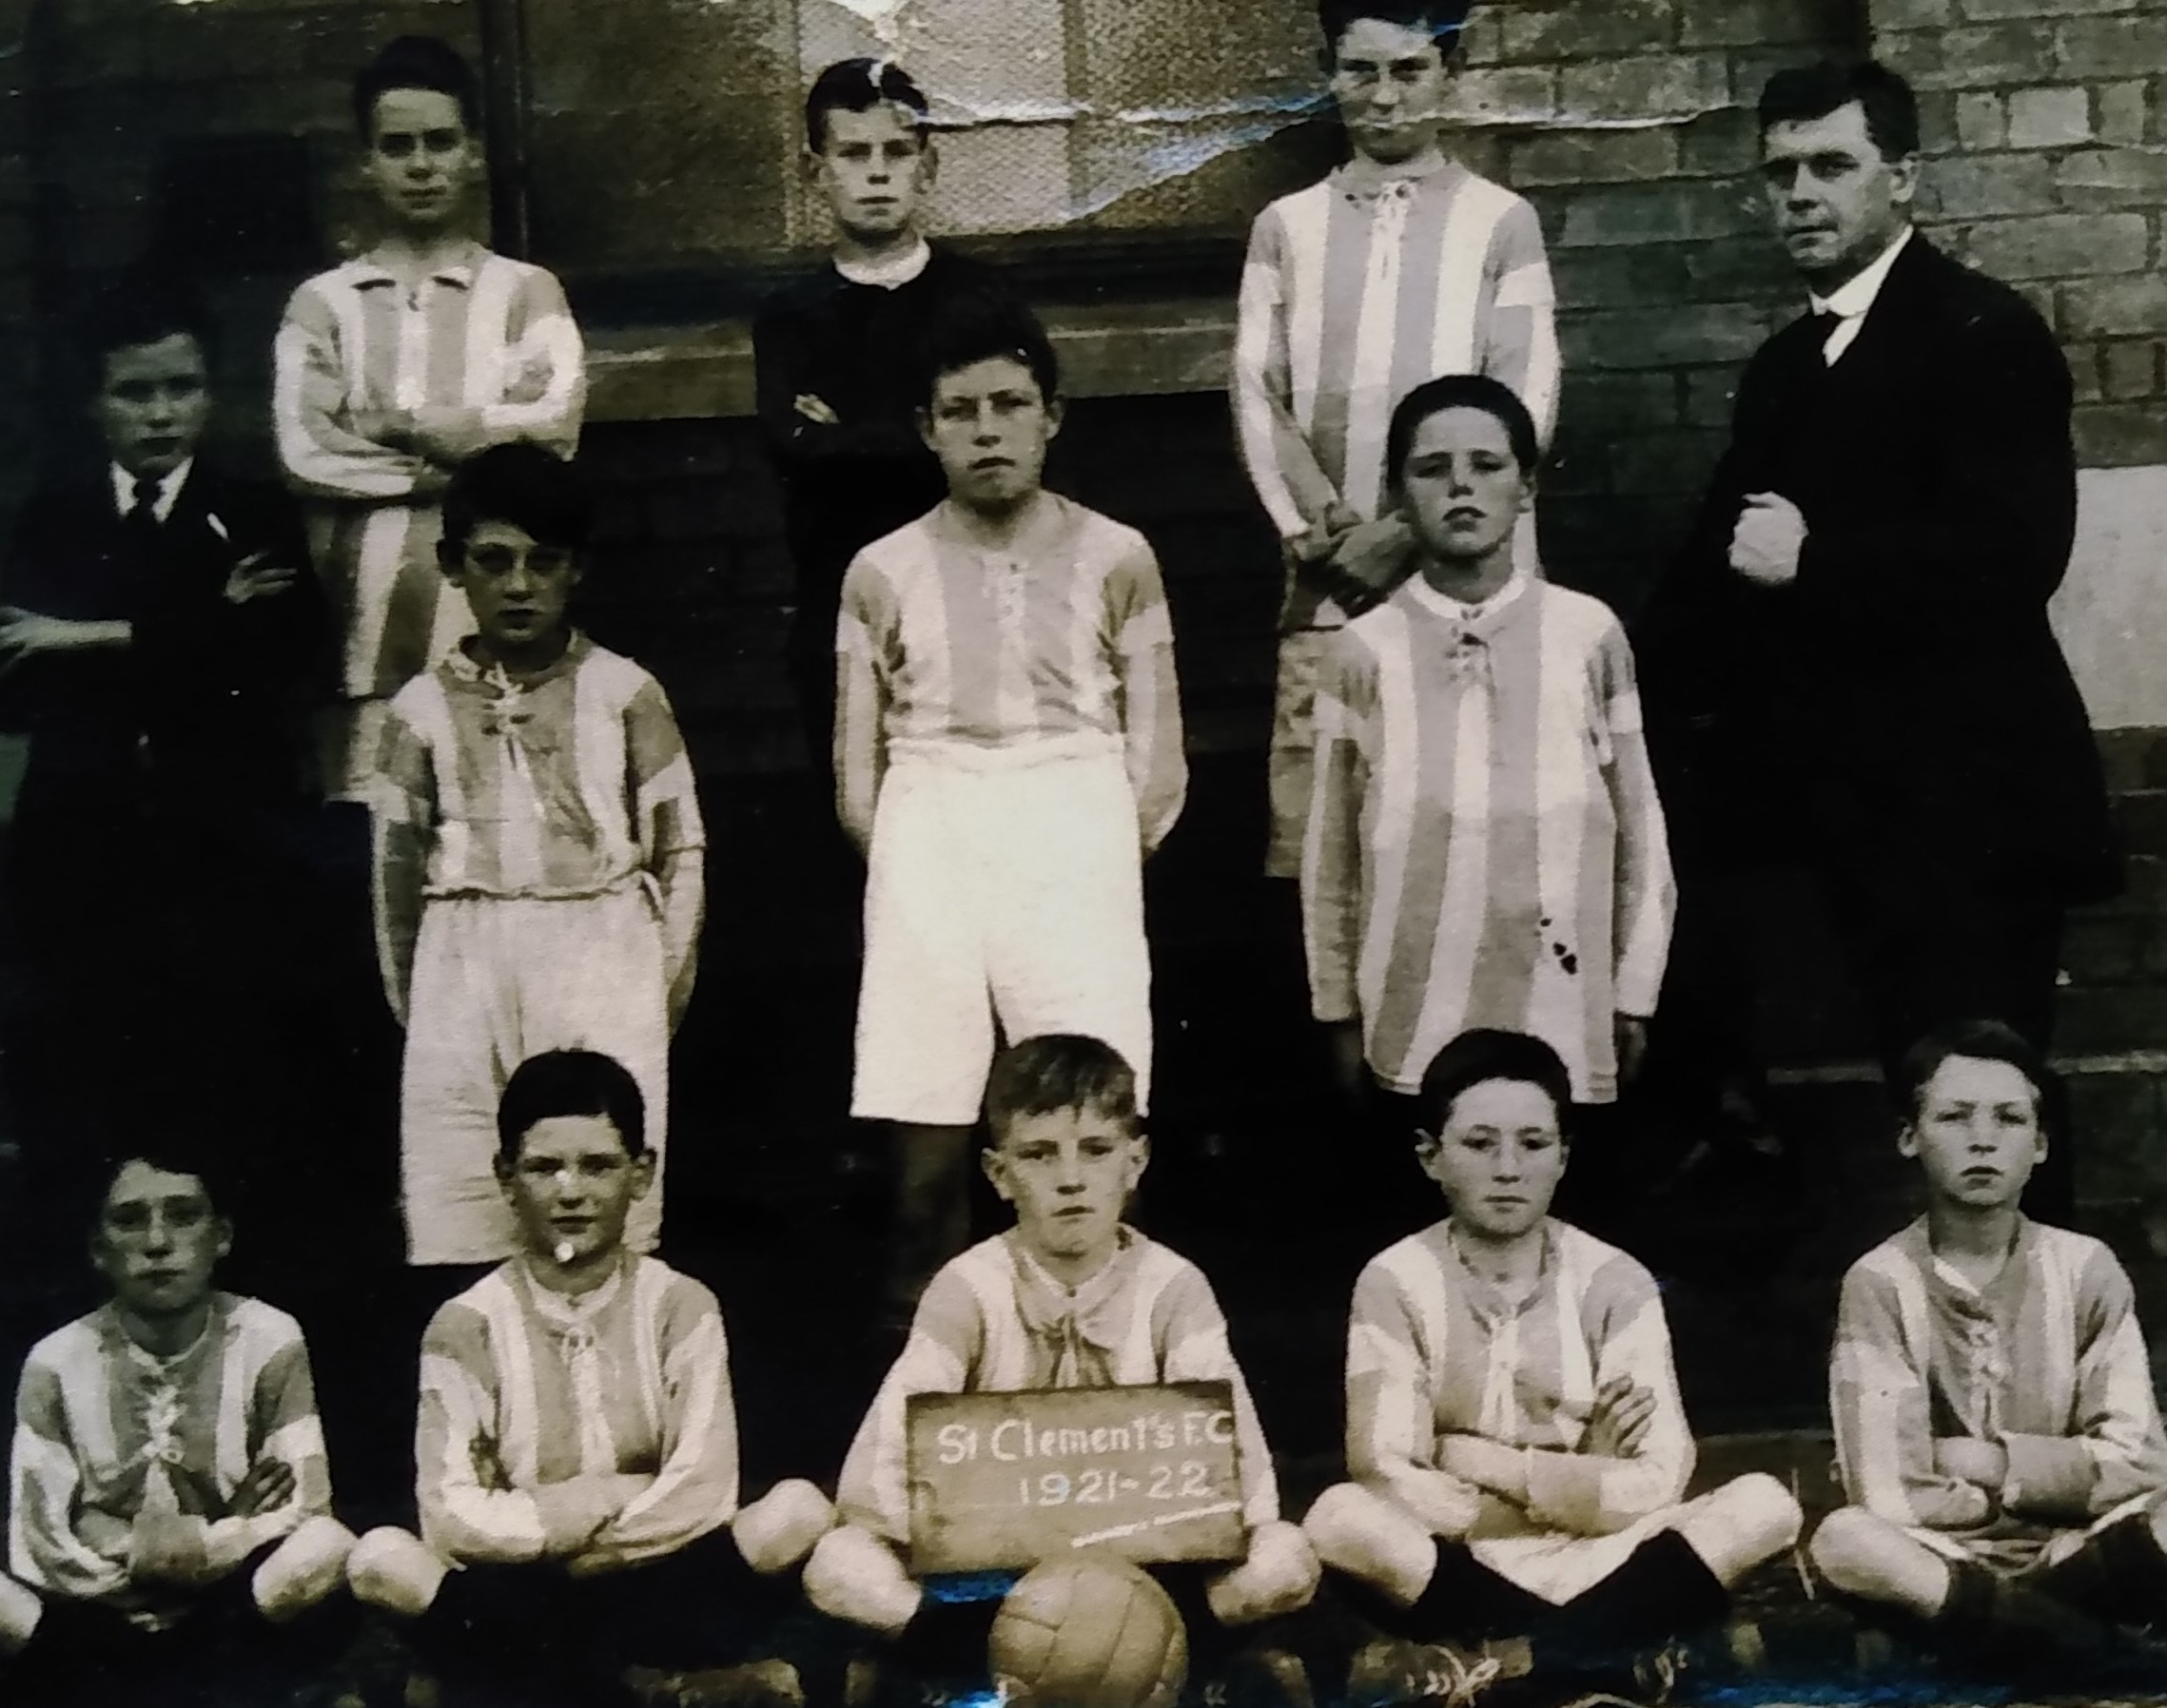 St Clements FC, 1921-22 says the chalkboard in front of this stern-looking bunch of boys